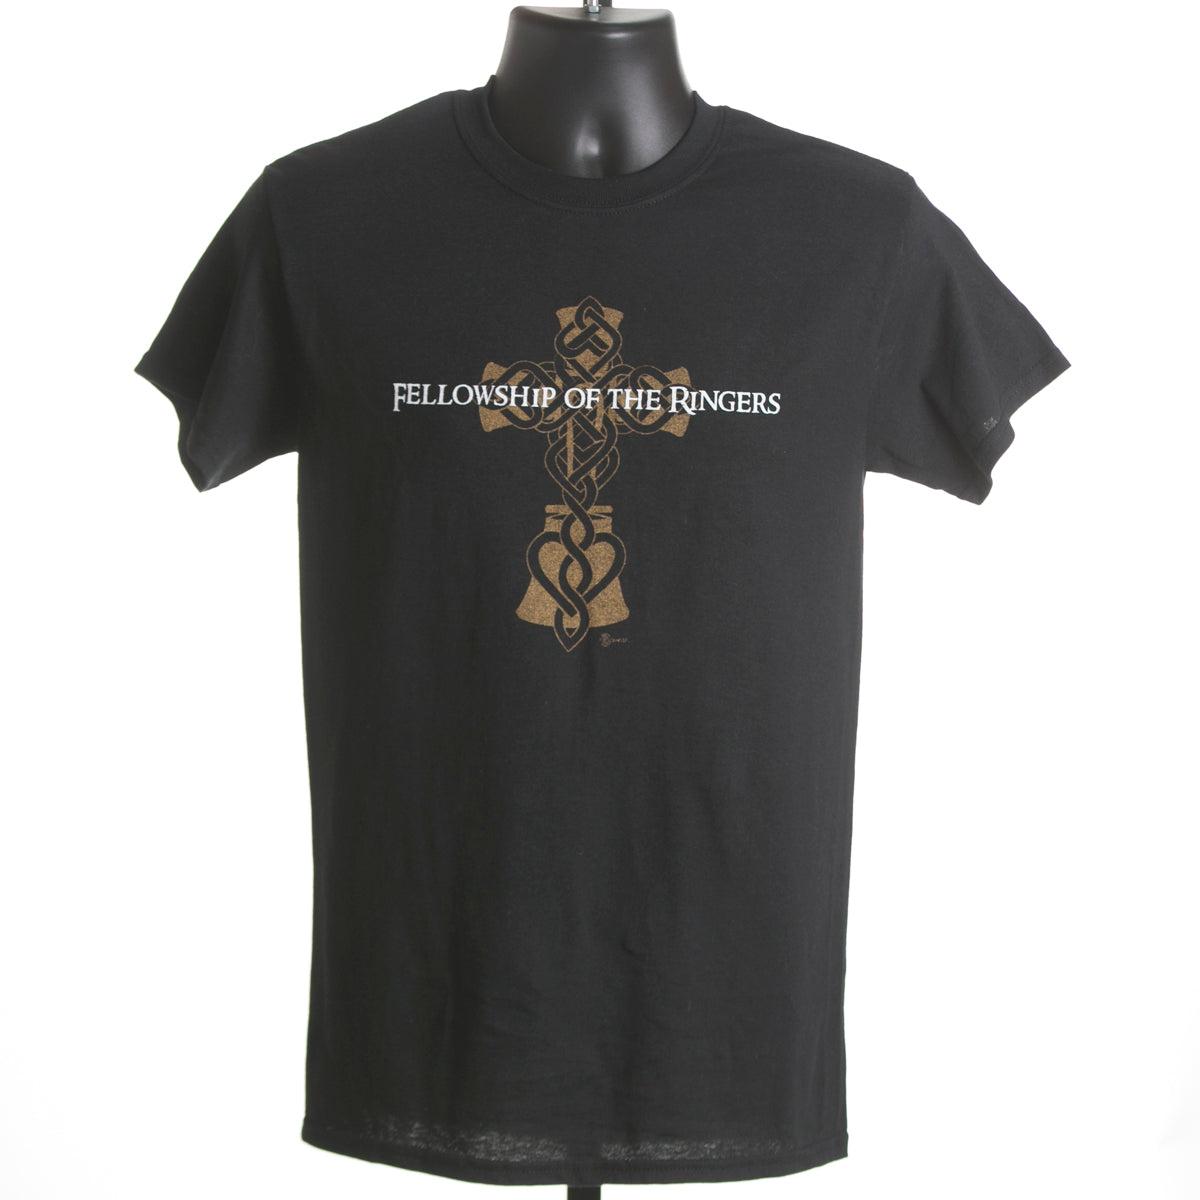 T-shirt - Fellowship of the Ringers